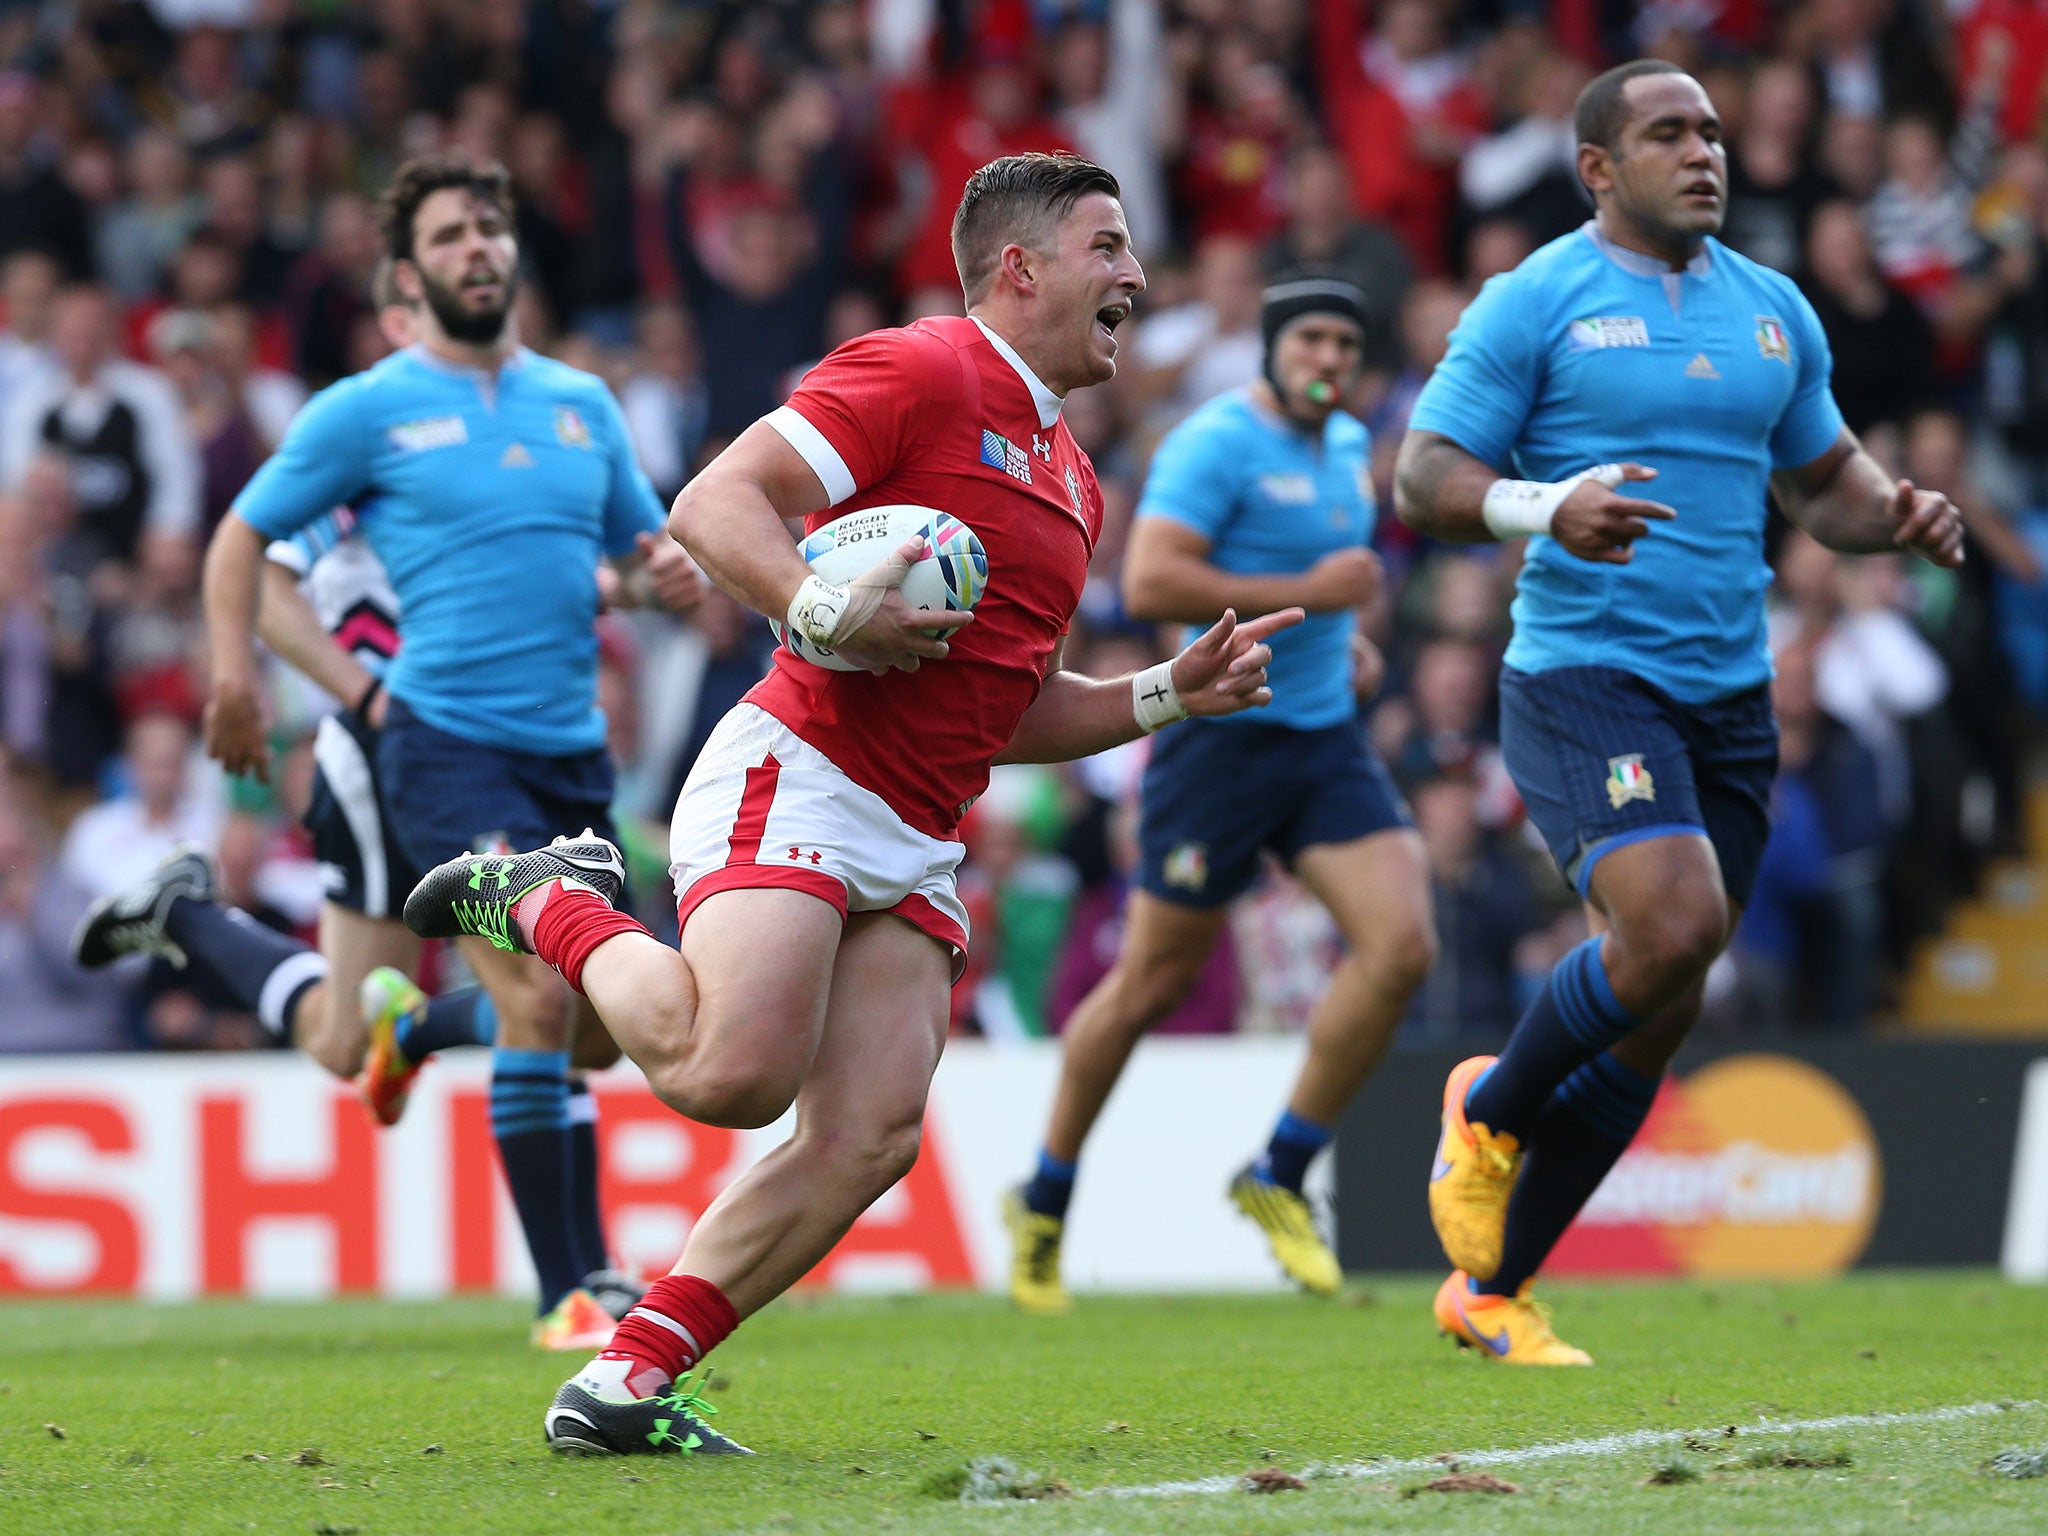 DTH Van Der Merwe scores a try for Canada against Italy